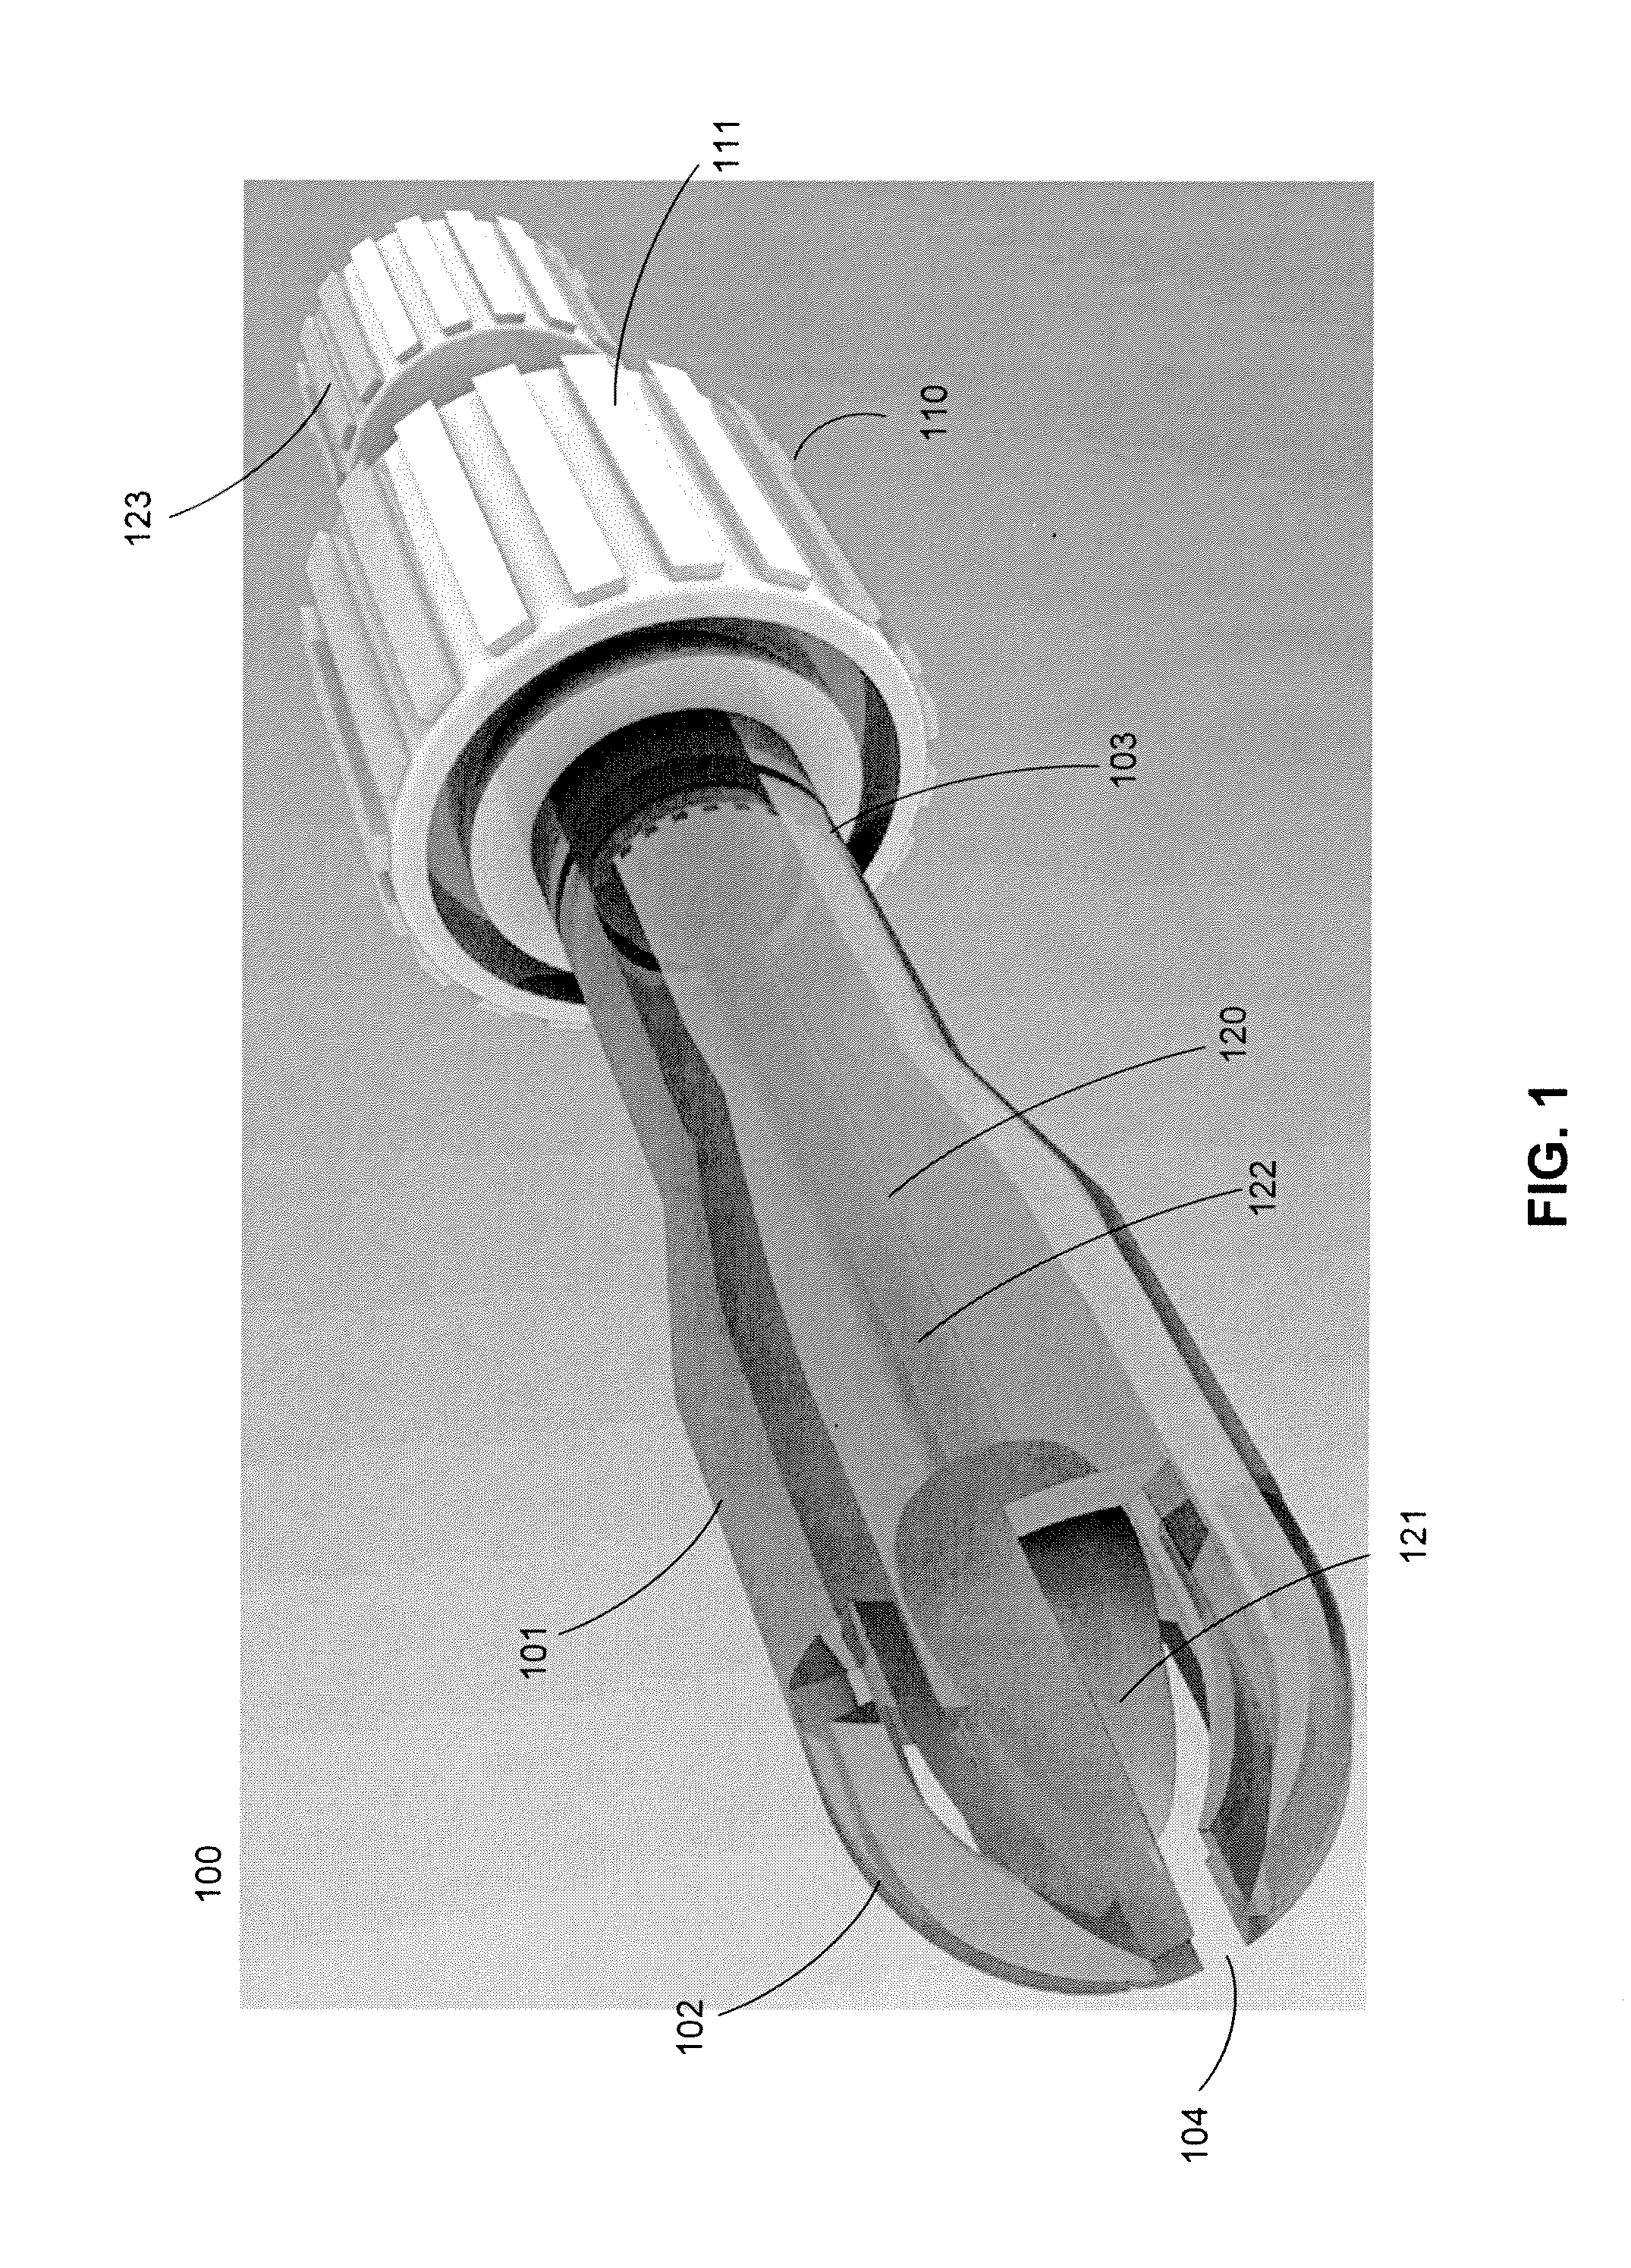 Cytological cell sample collection, storage, and transport device